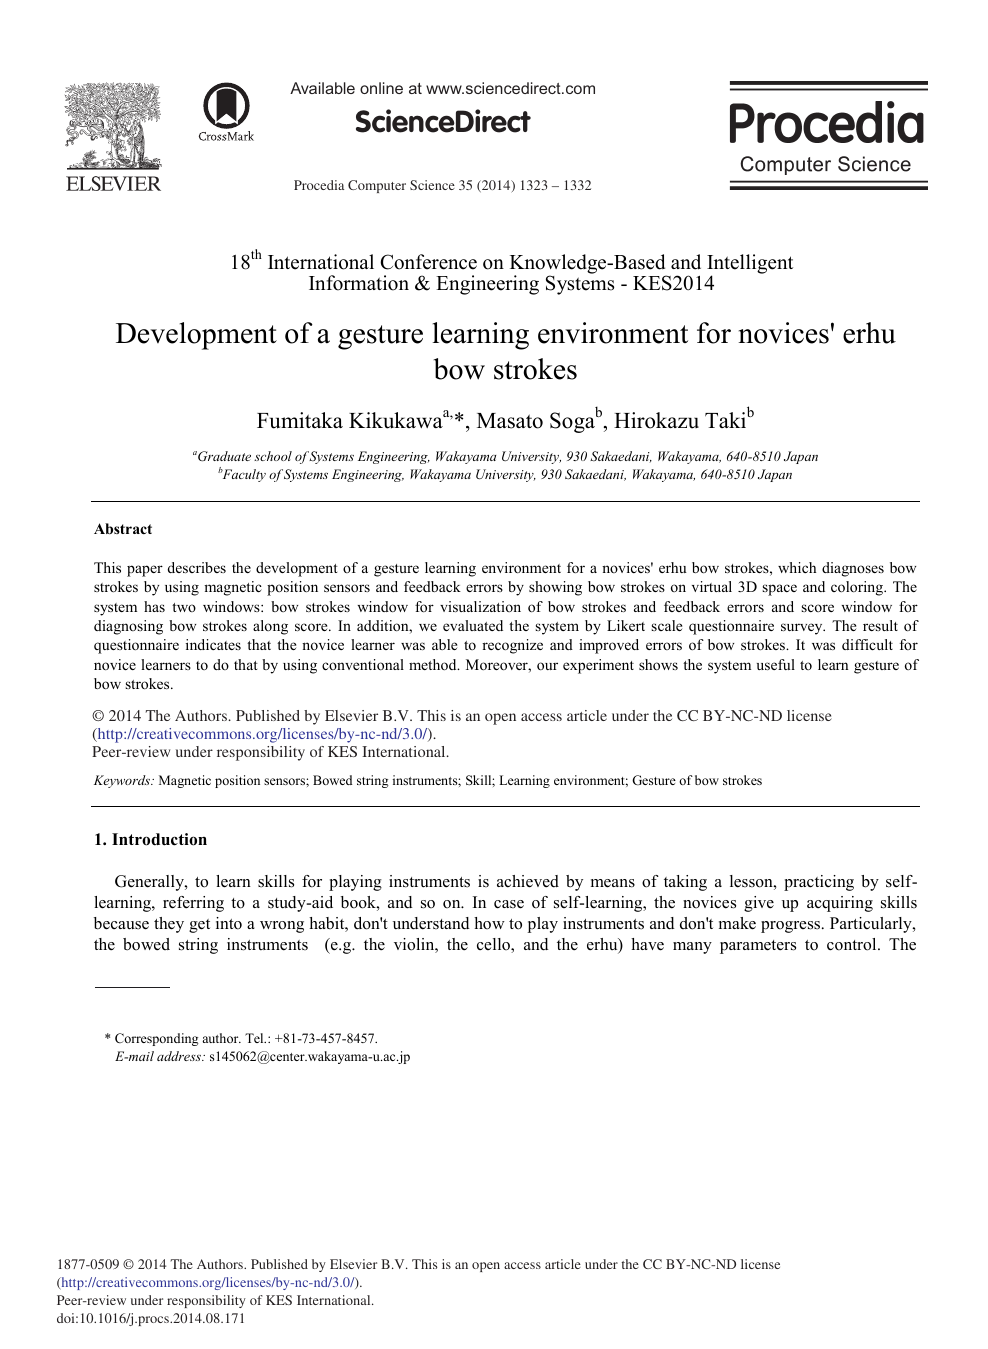 Development Of A Gesture Learning Environment For Novices Erhu Bow Strokes Topic Of Research Paper In Computer And Information Sciences Download Scholarly Article Pdf And Read For Free On Cyberleninka Open